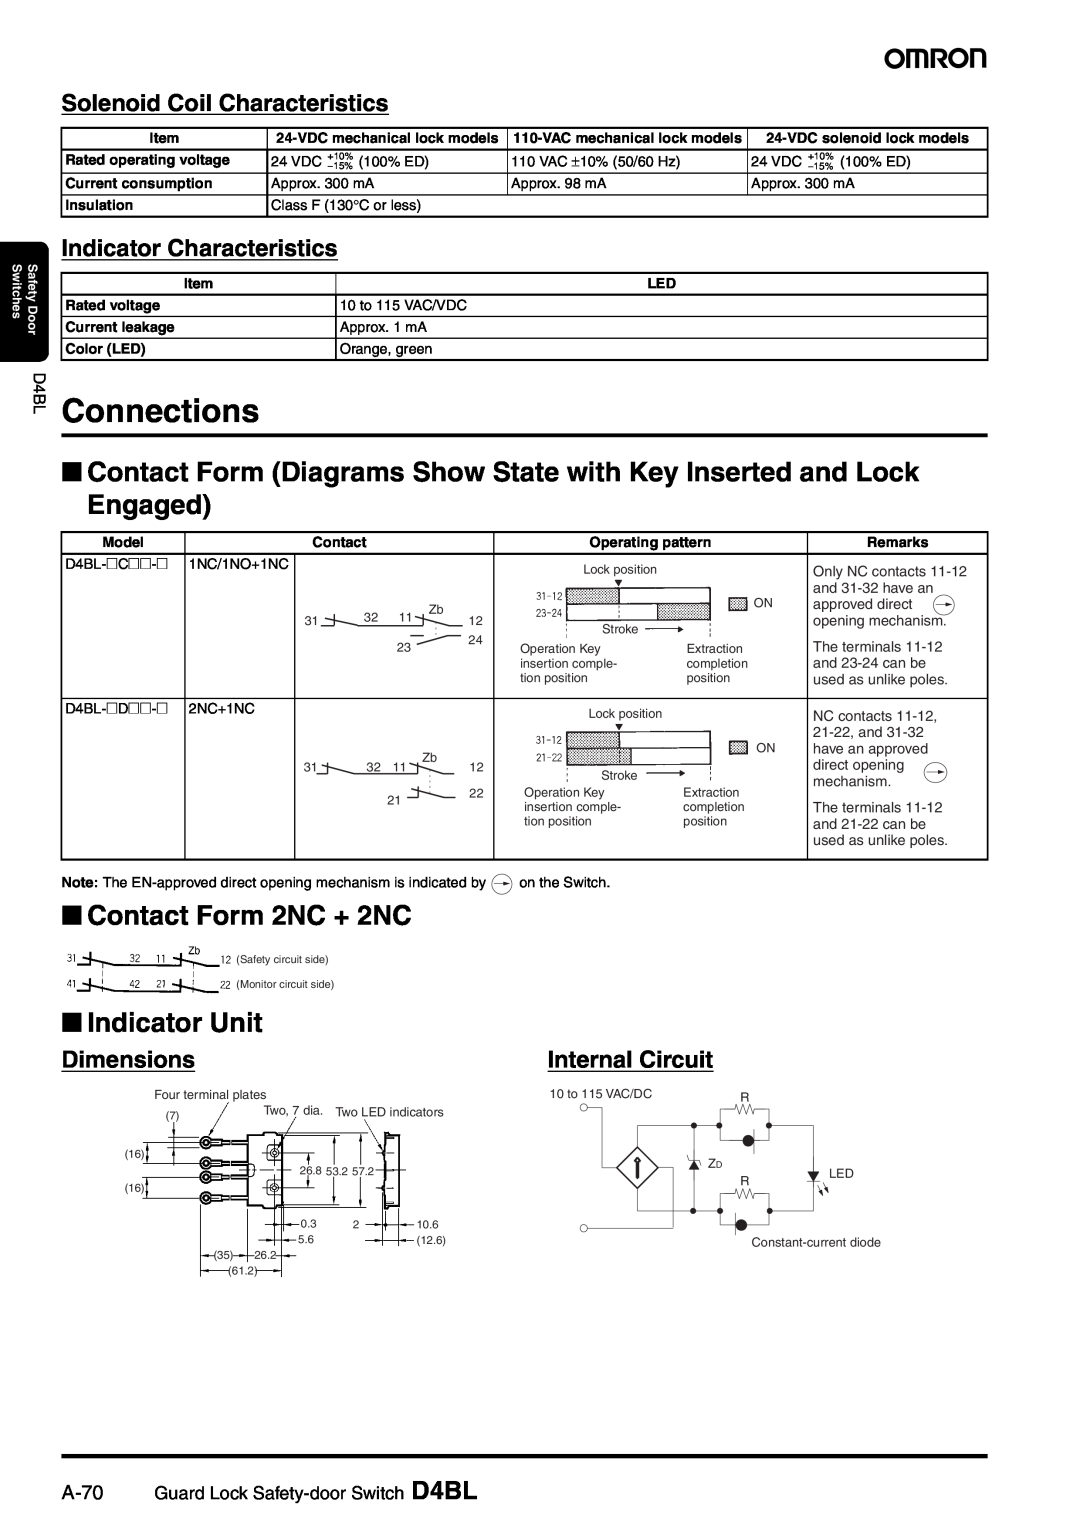 Omron D4BL manual Connections, Contact Form Diagrams Show State with Key Inserted and Lock Engaged, Contact Form 2NC + 2NC 